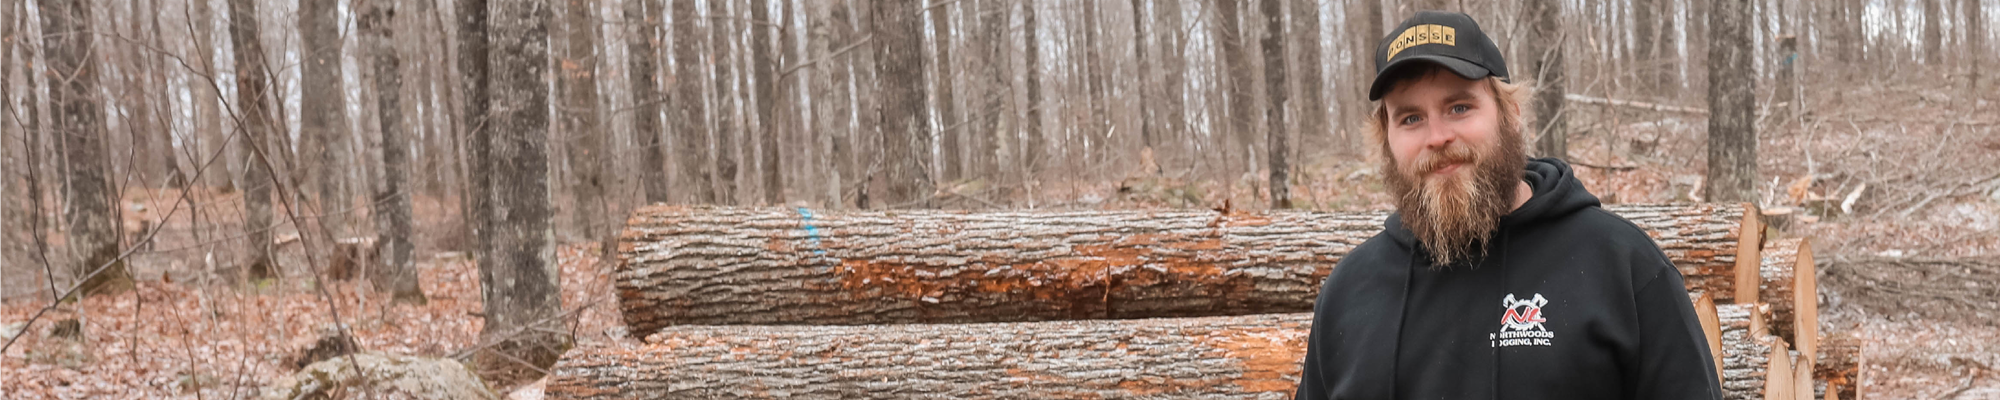 Man in front of stack of logs